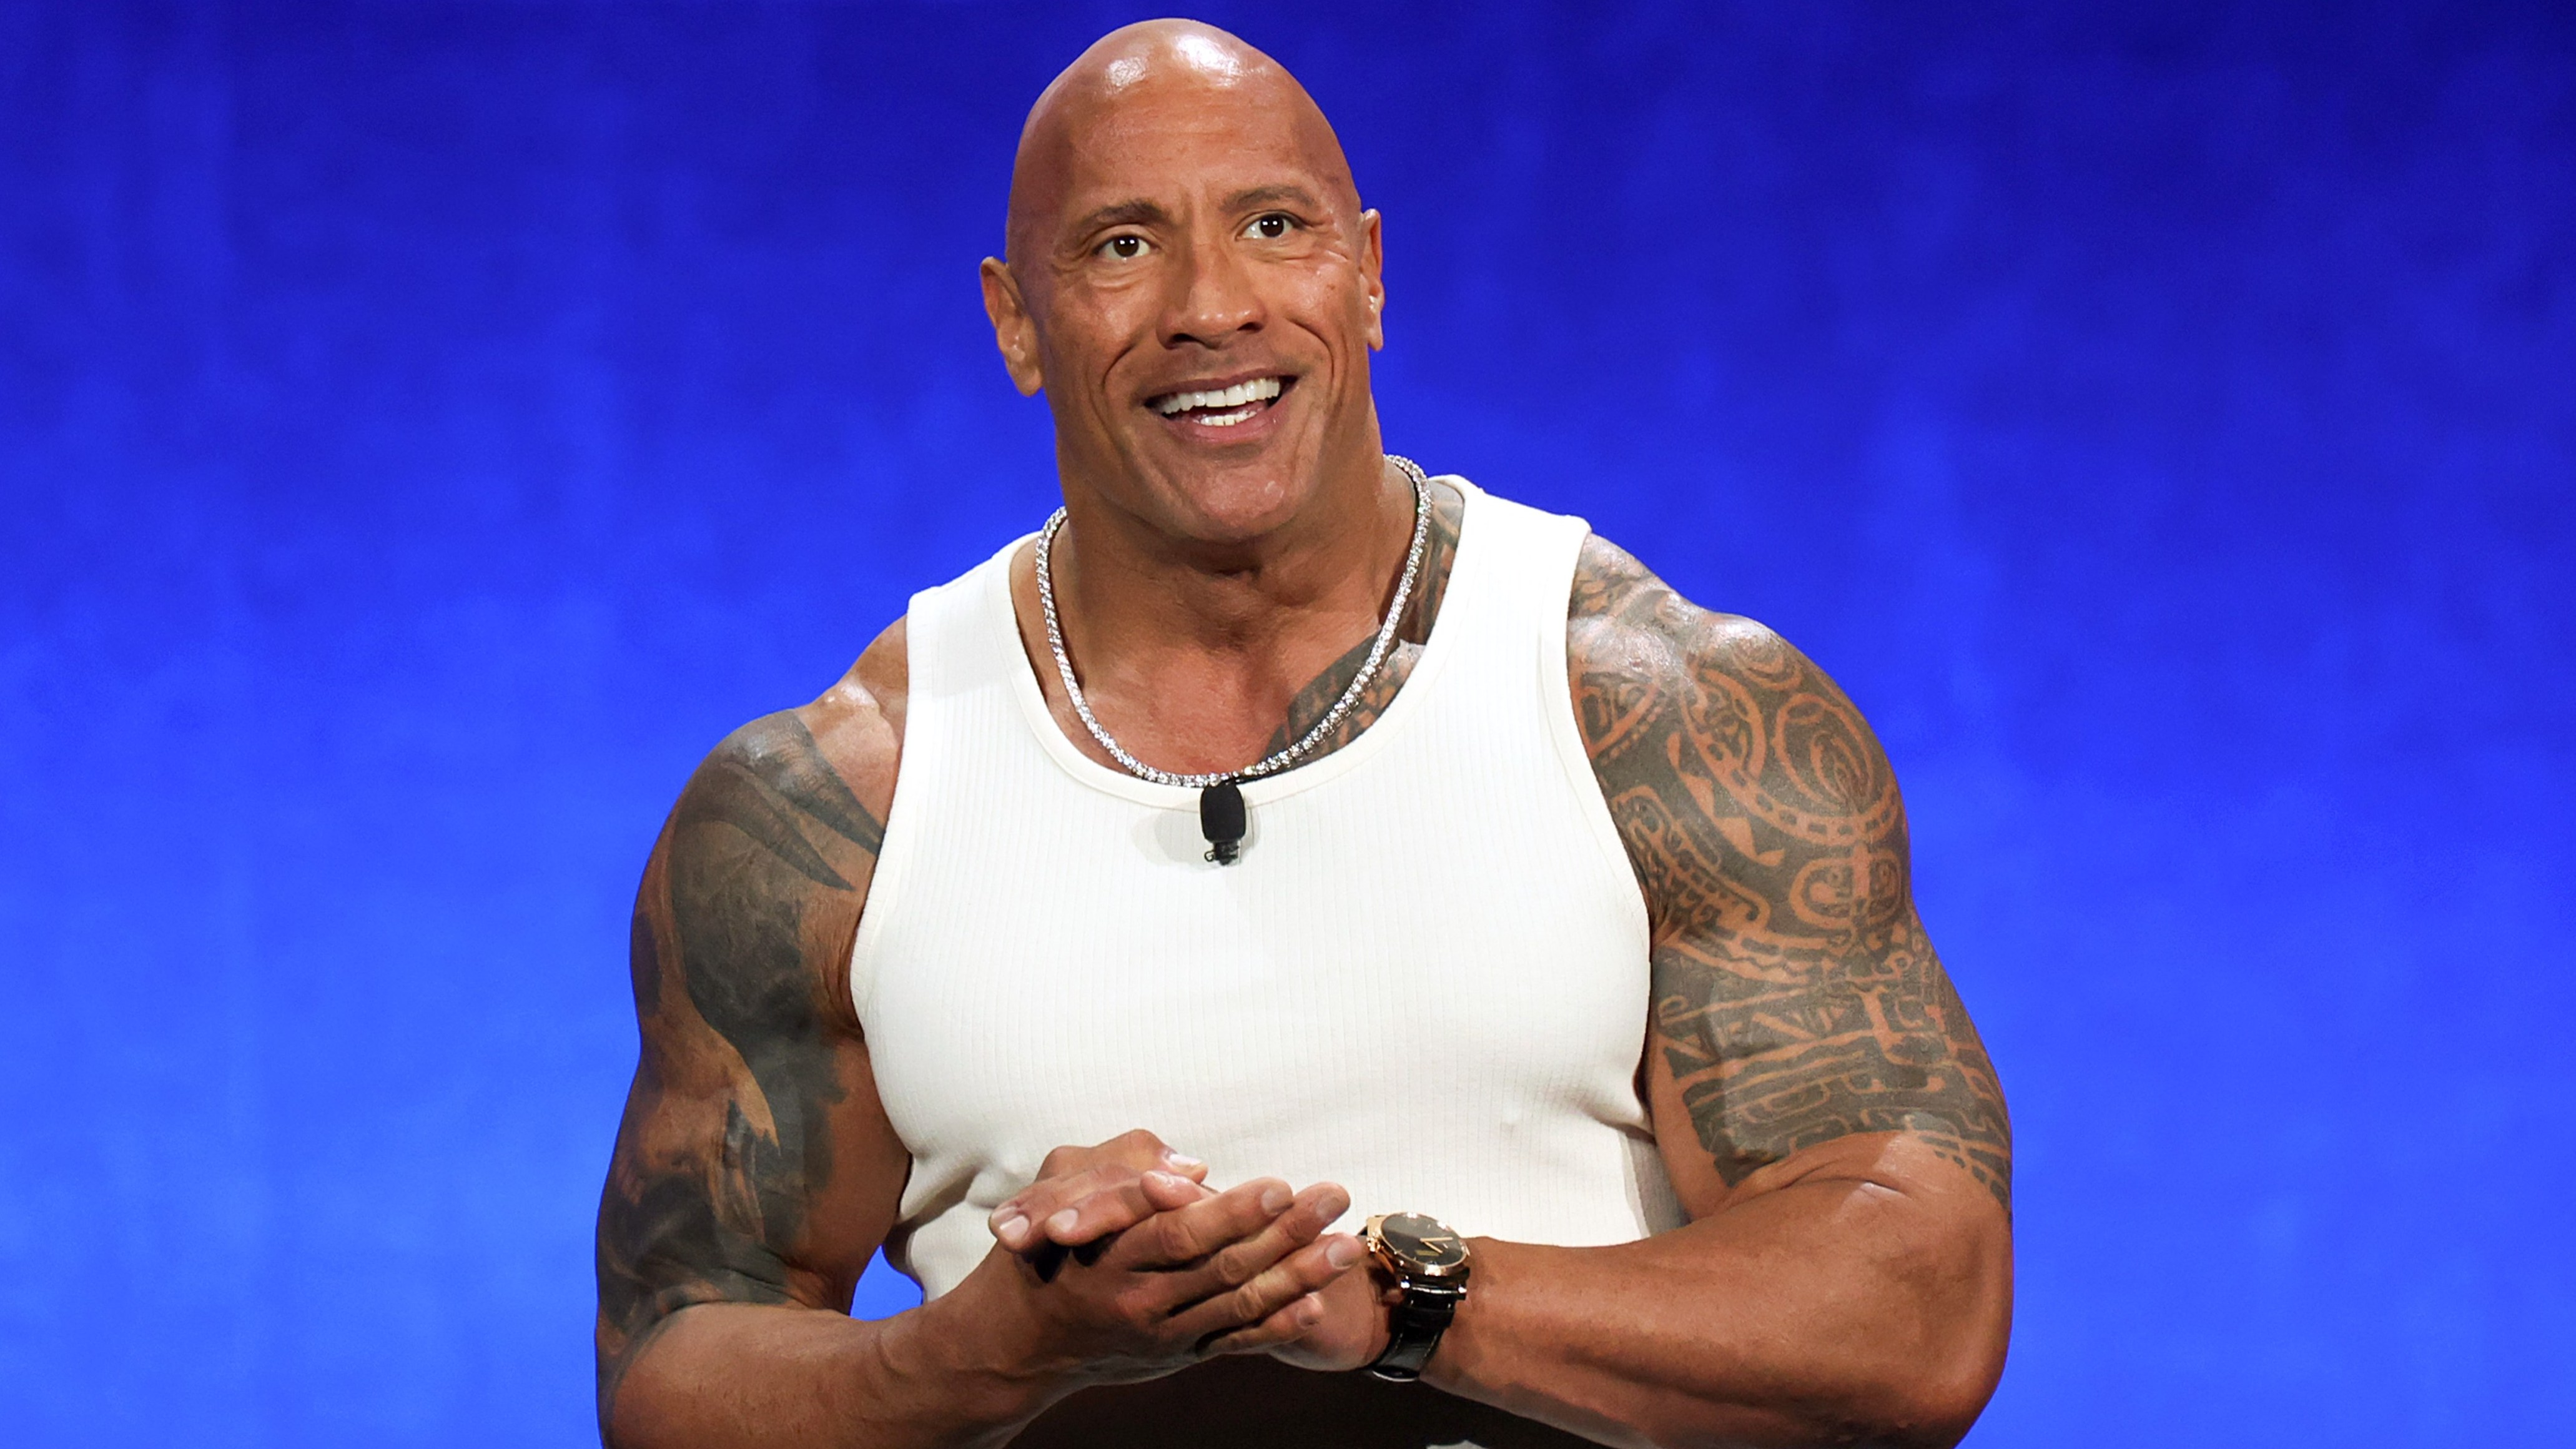 The former wrestler Dwayne Johnson is one of Hollywood’s most bankable action heroes